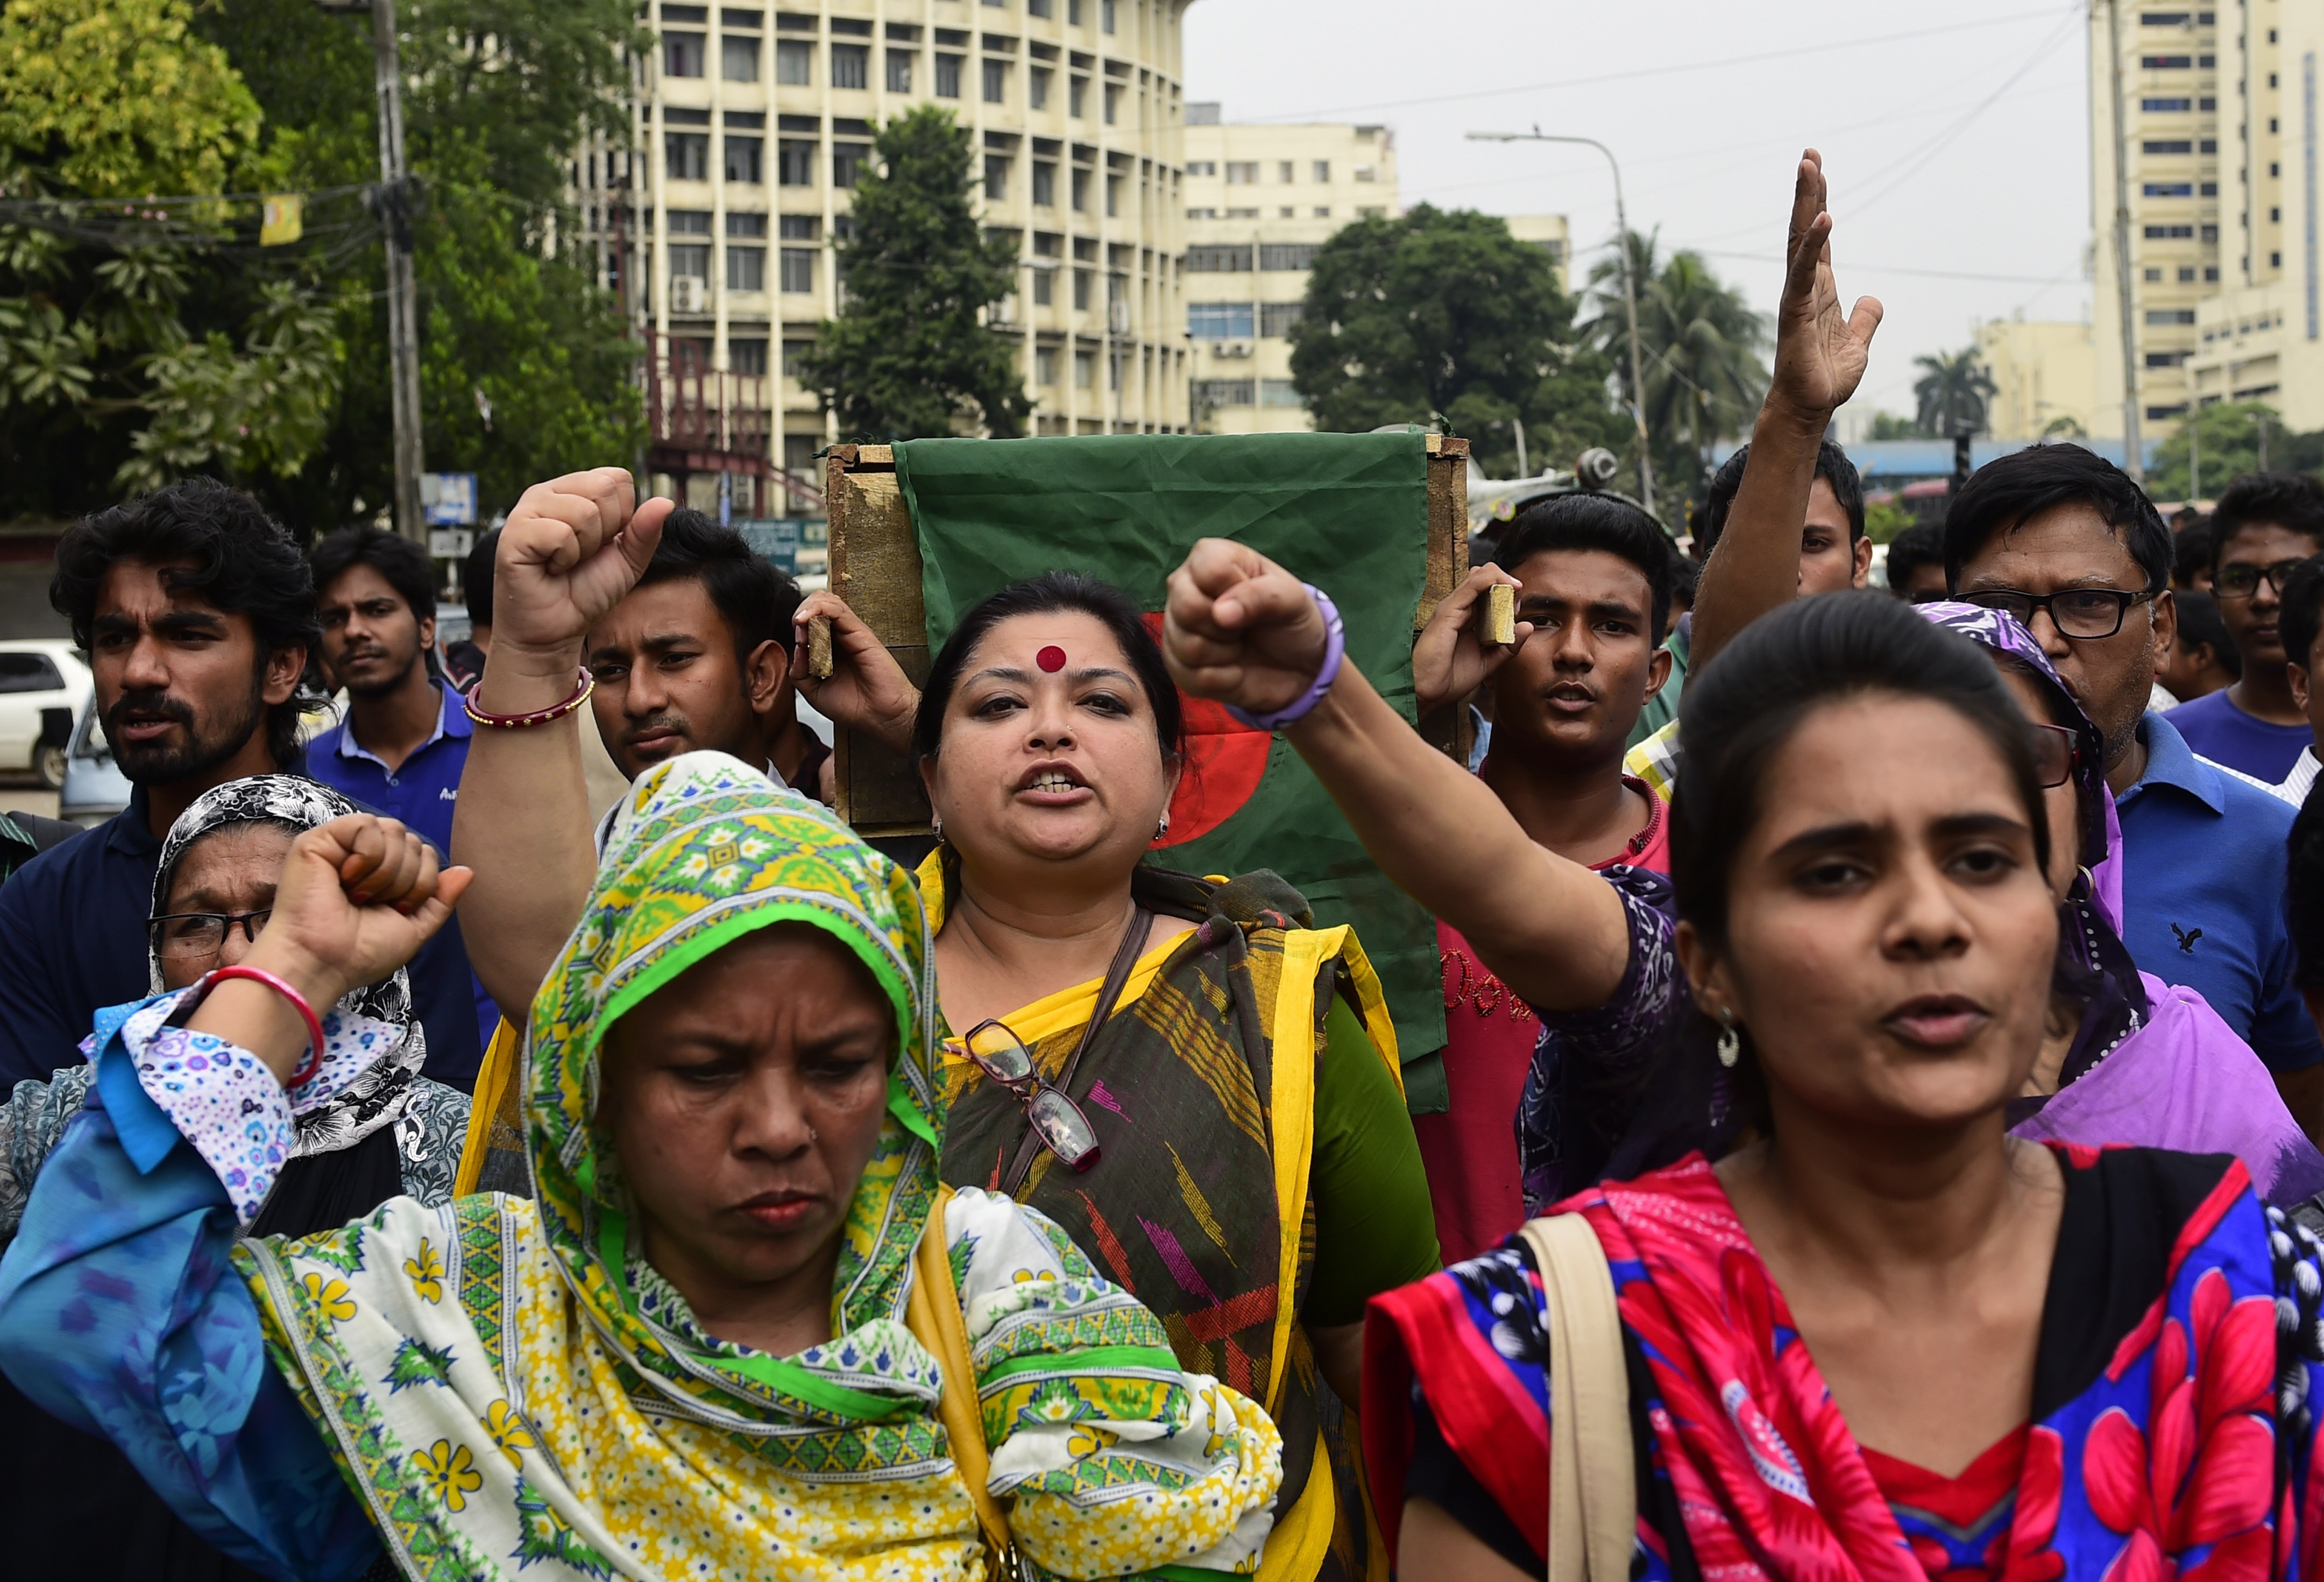 Bangladeshi activists shout slogans as they march in the street with mock coffins, which symbolize the deaths of secular publishers and bloggers, in Dhaka on Nov. 5, 2015 (Munir Uz Zaman—AFP/Getty Images)